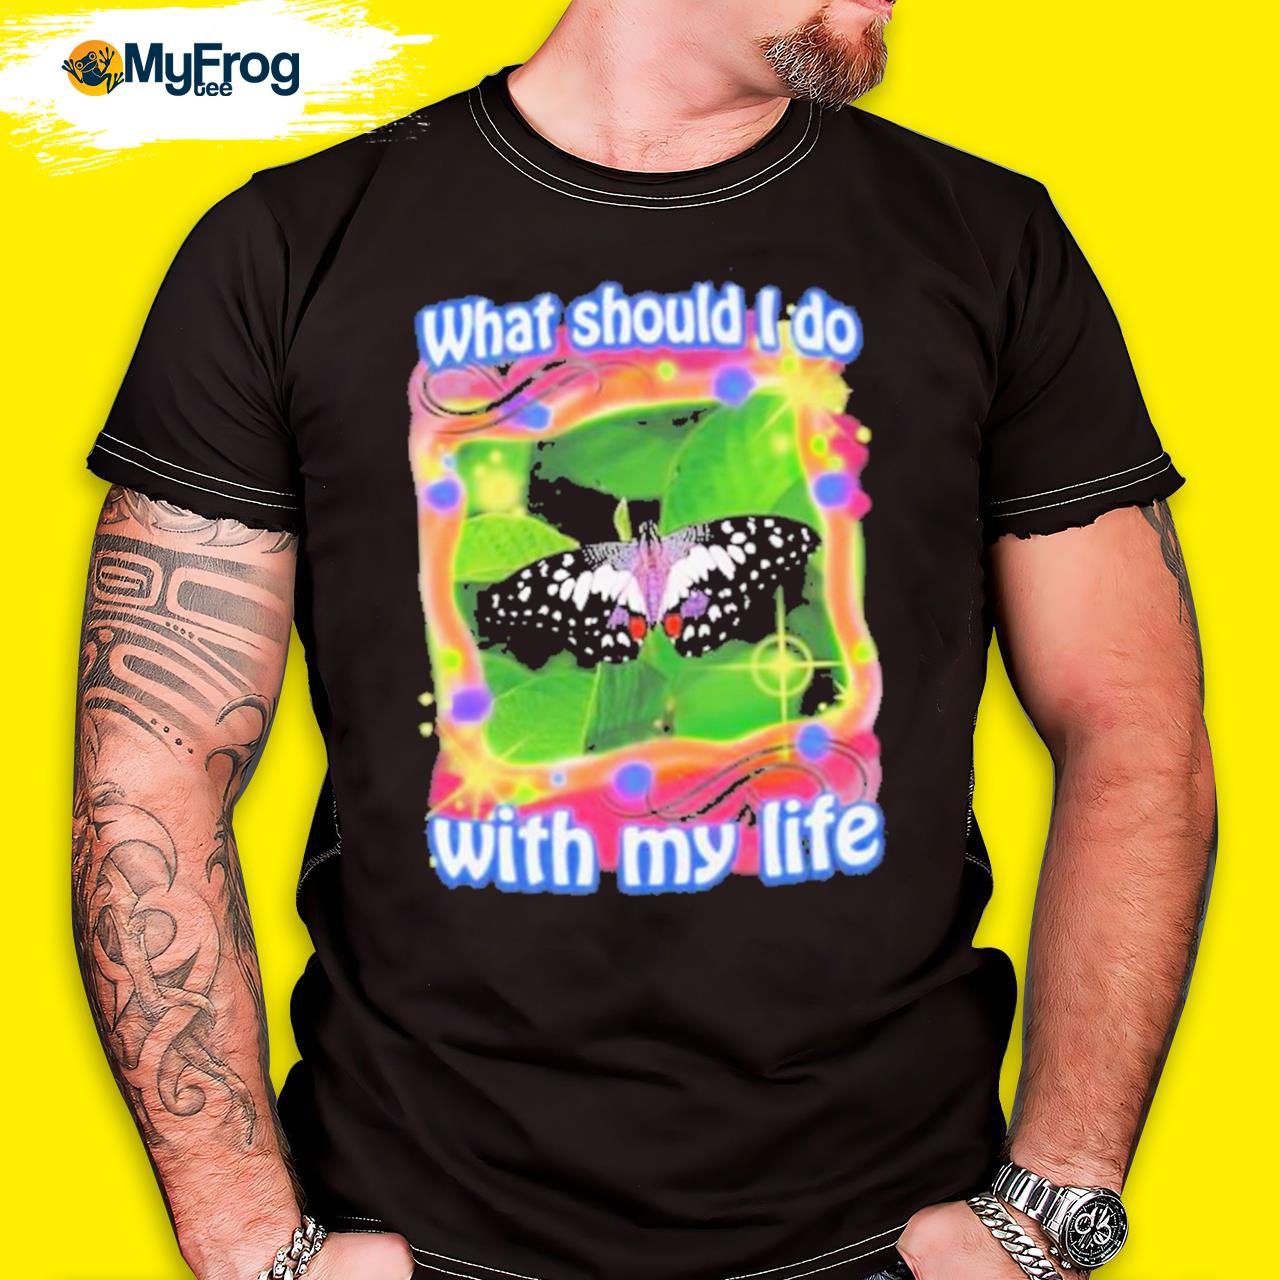 What Should I Do With My Life Shirt